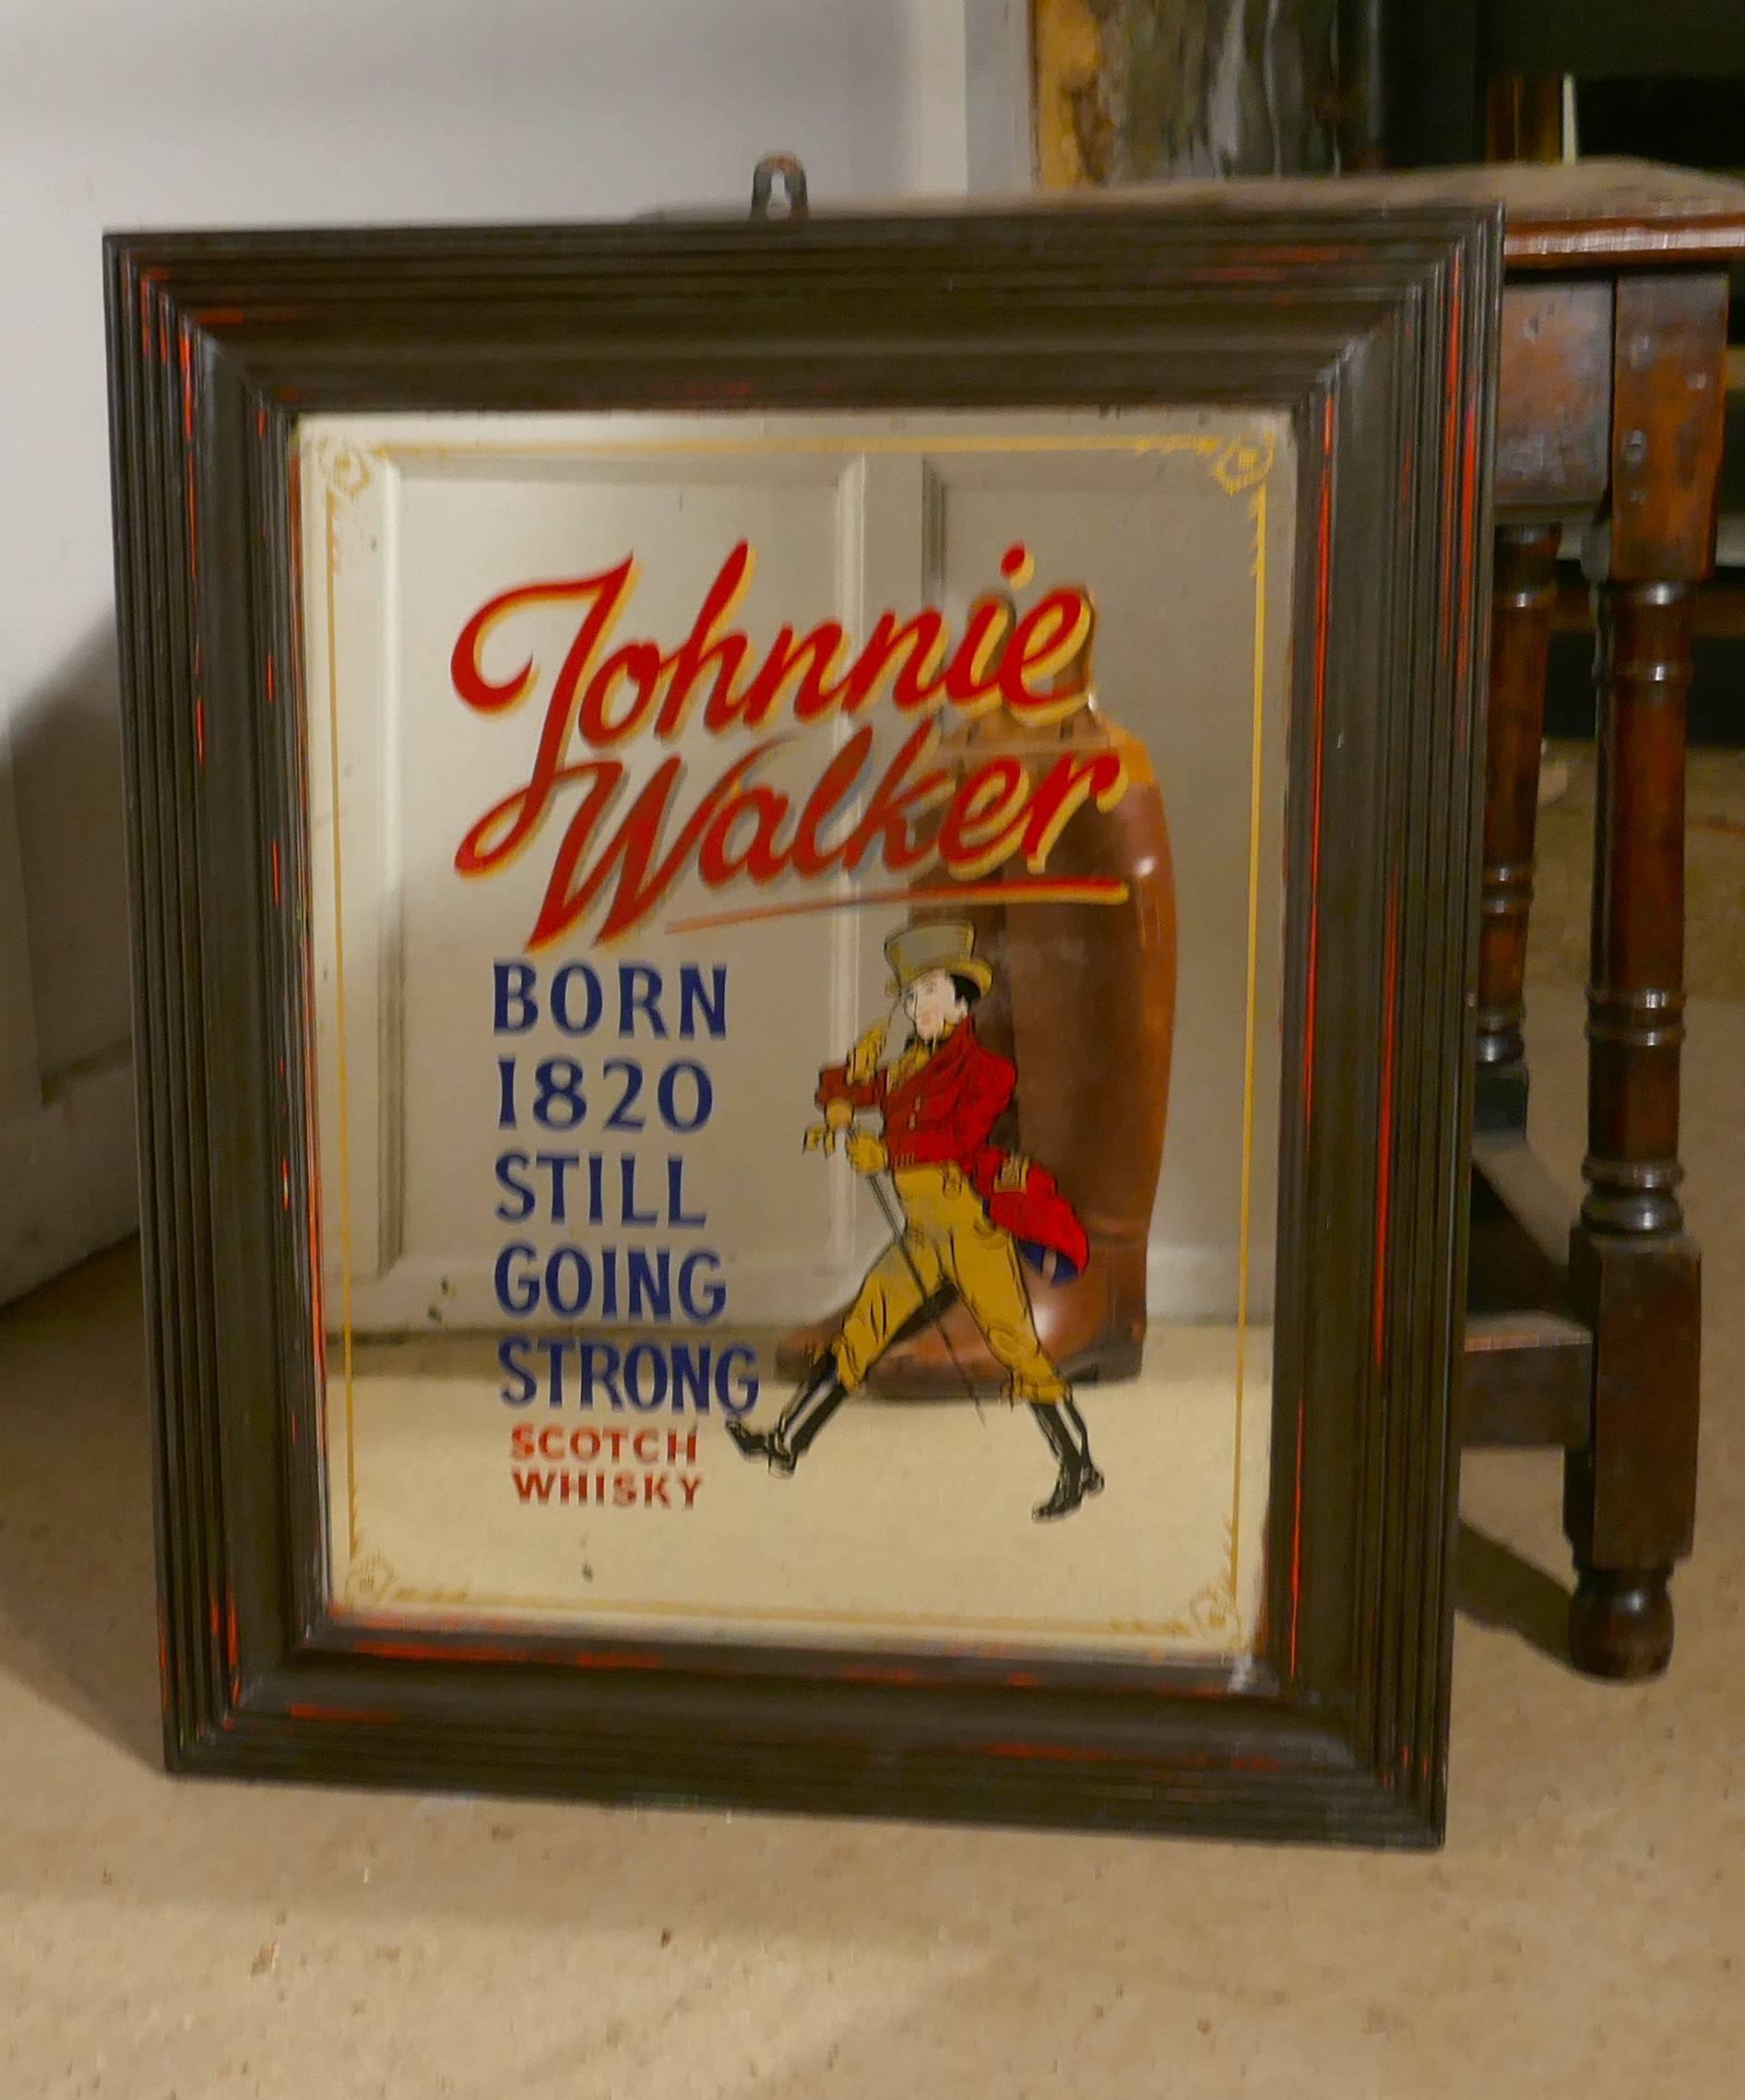 The mirror is painted with the character of Johnnie Walker in his riding boots, britches, top hat and tail coat in hunting pink, monocle in hand and swagger stick swinging
The shabby painted mirror frame is replacement, the mirror is original with